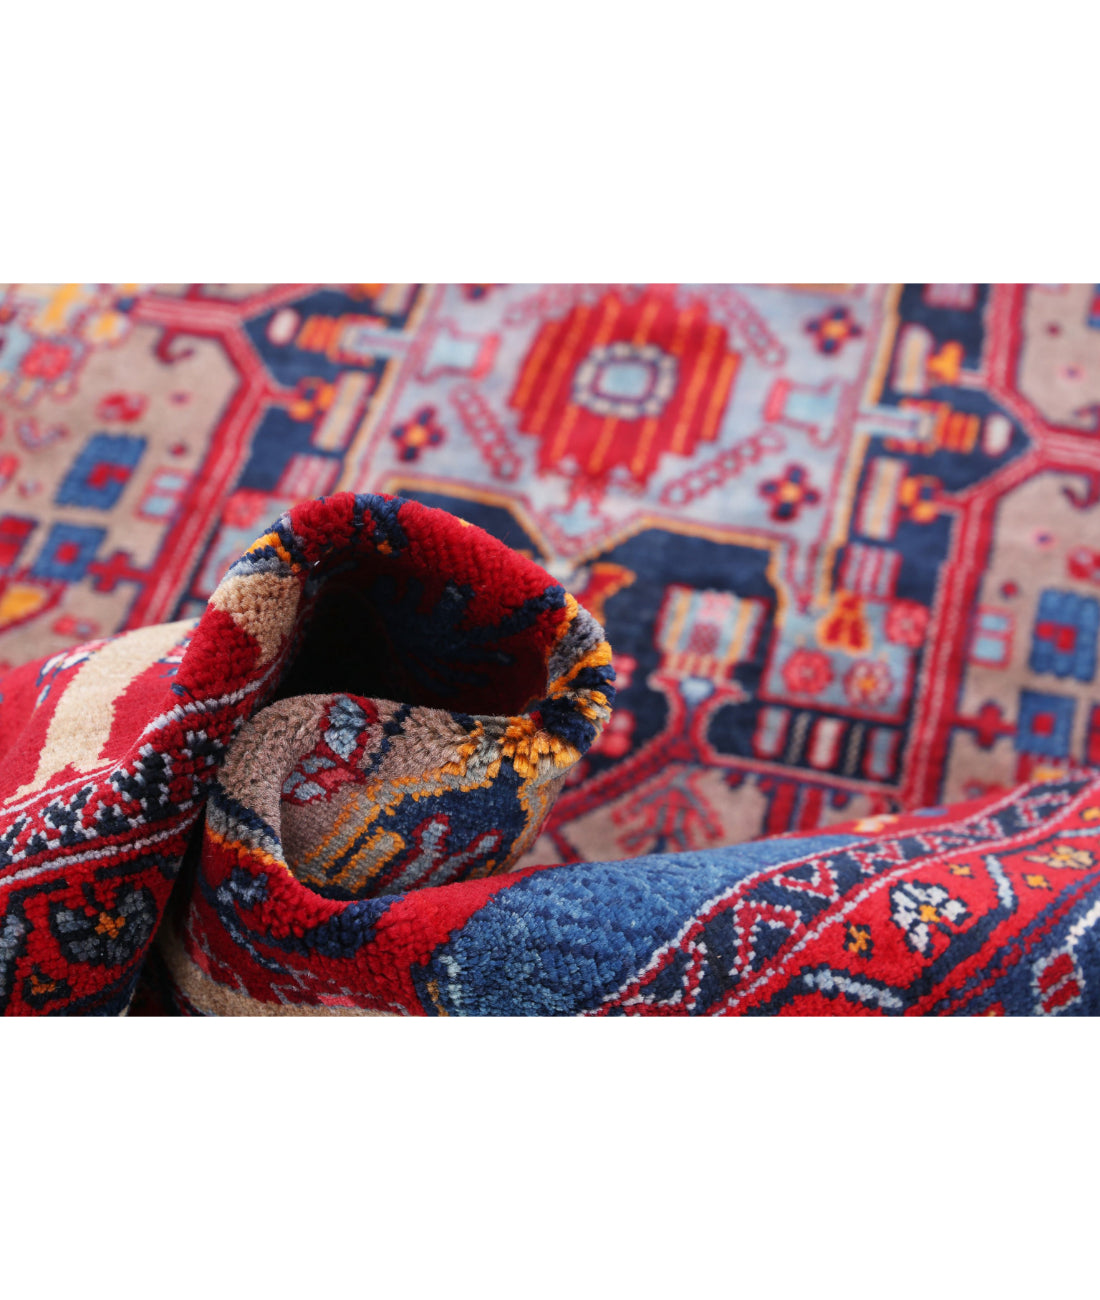 Hand Knotted Persian Hamadan Wool Rug - 4'11'' x 9'0'' 4'11'' x 9'0'' (148 X 270) / Red / Blue